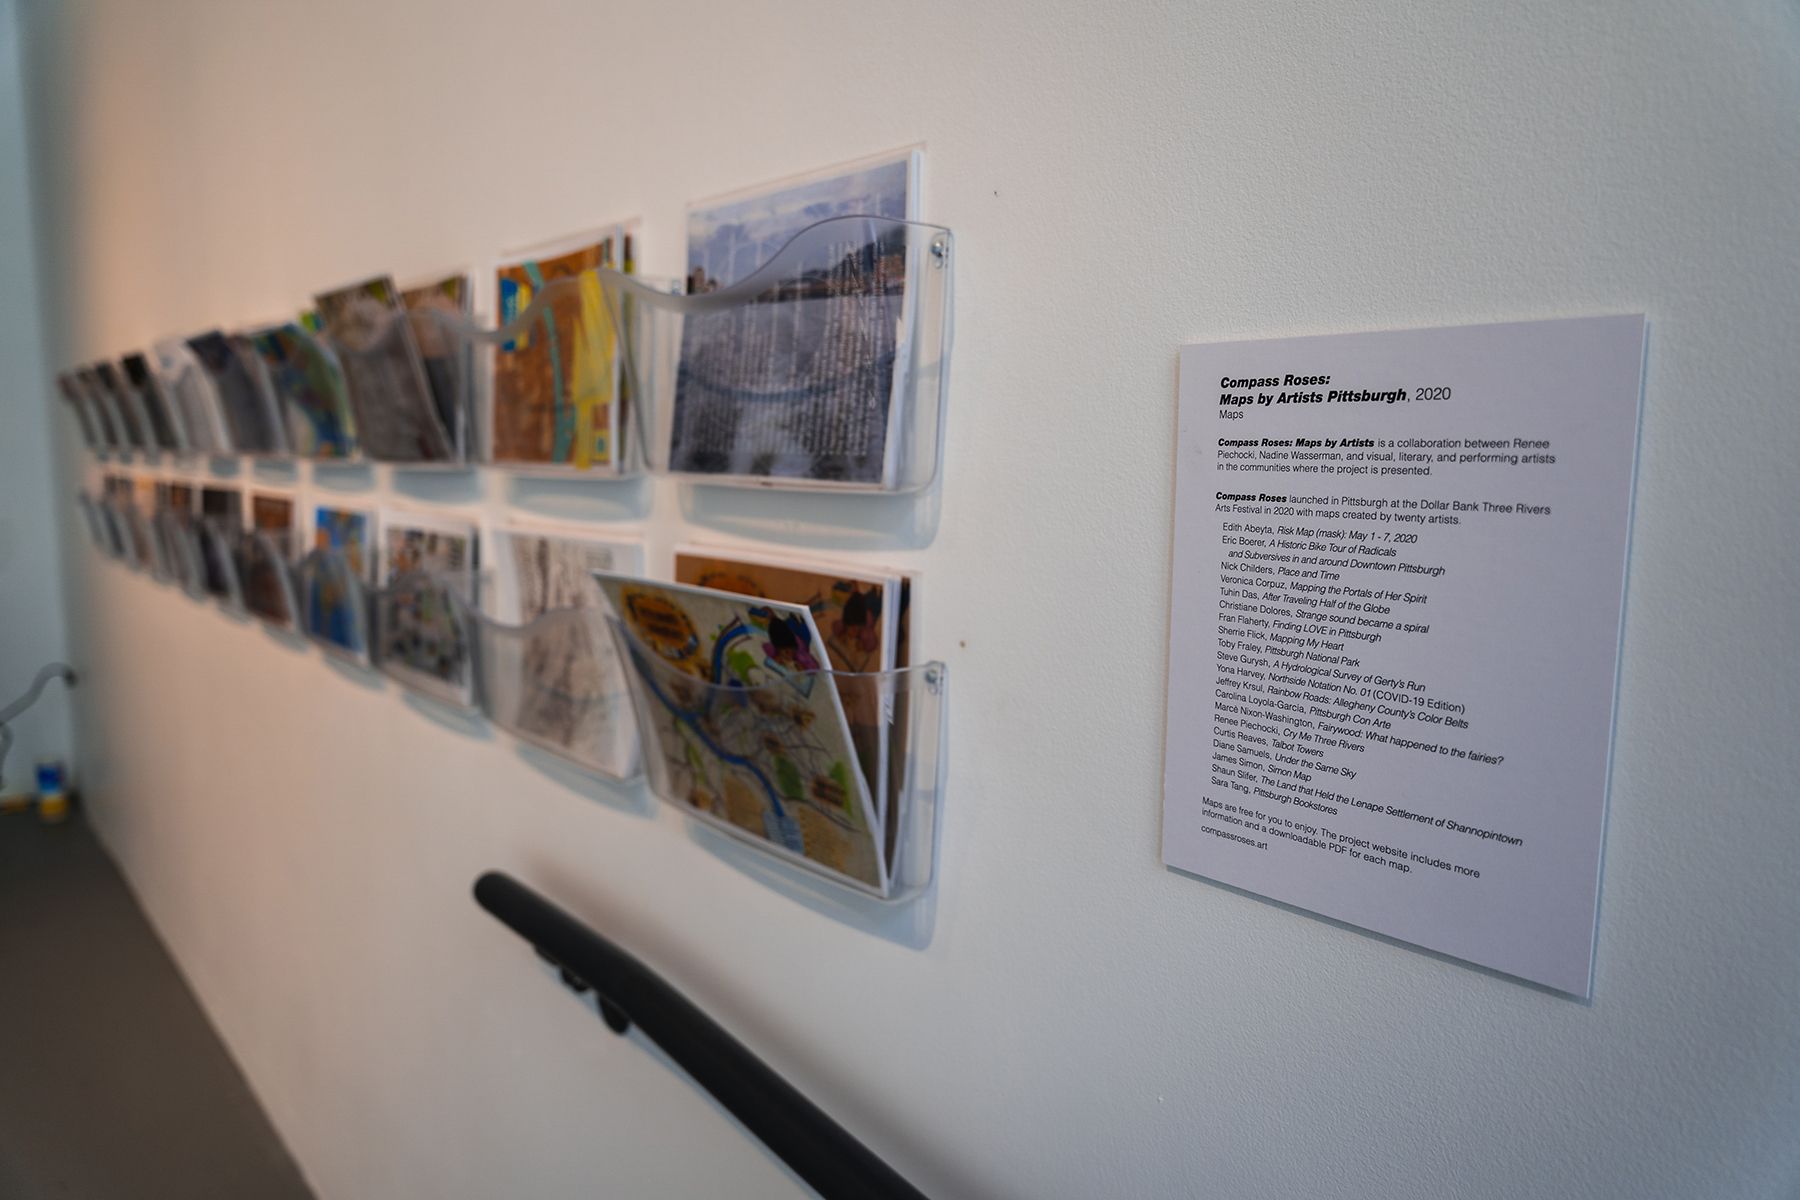 a two long rows of racks hanging on a gallery wall hold printed and laminated maps.